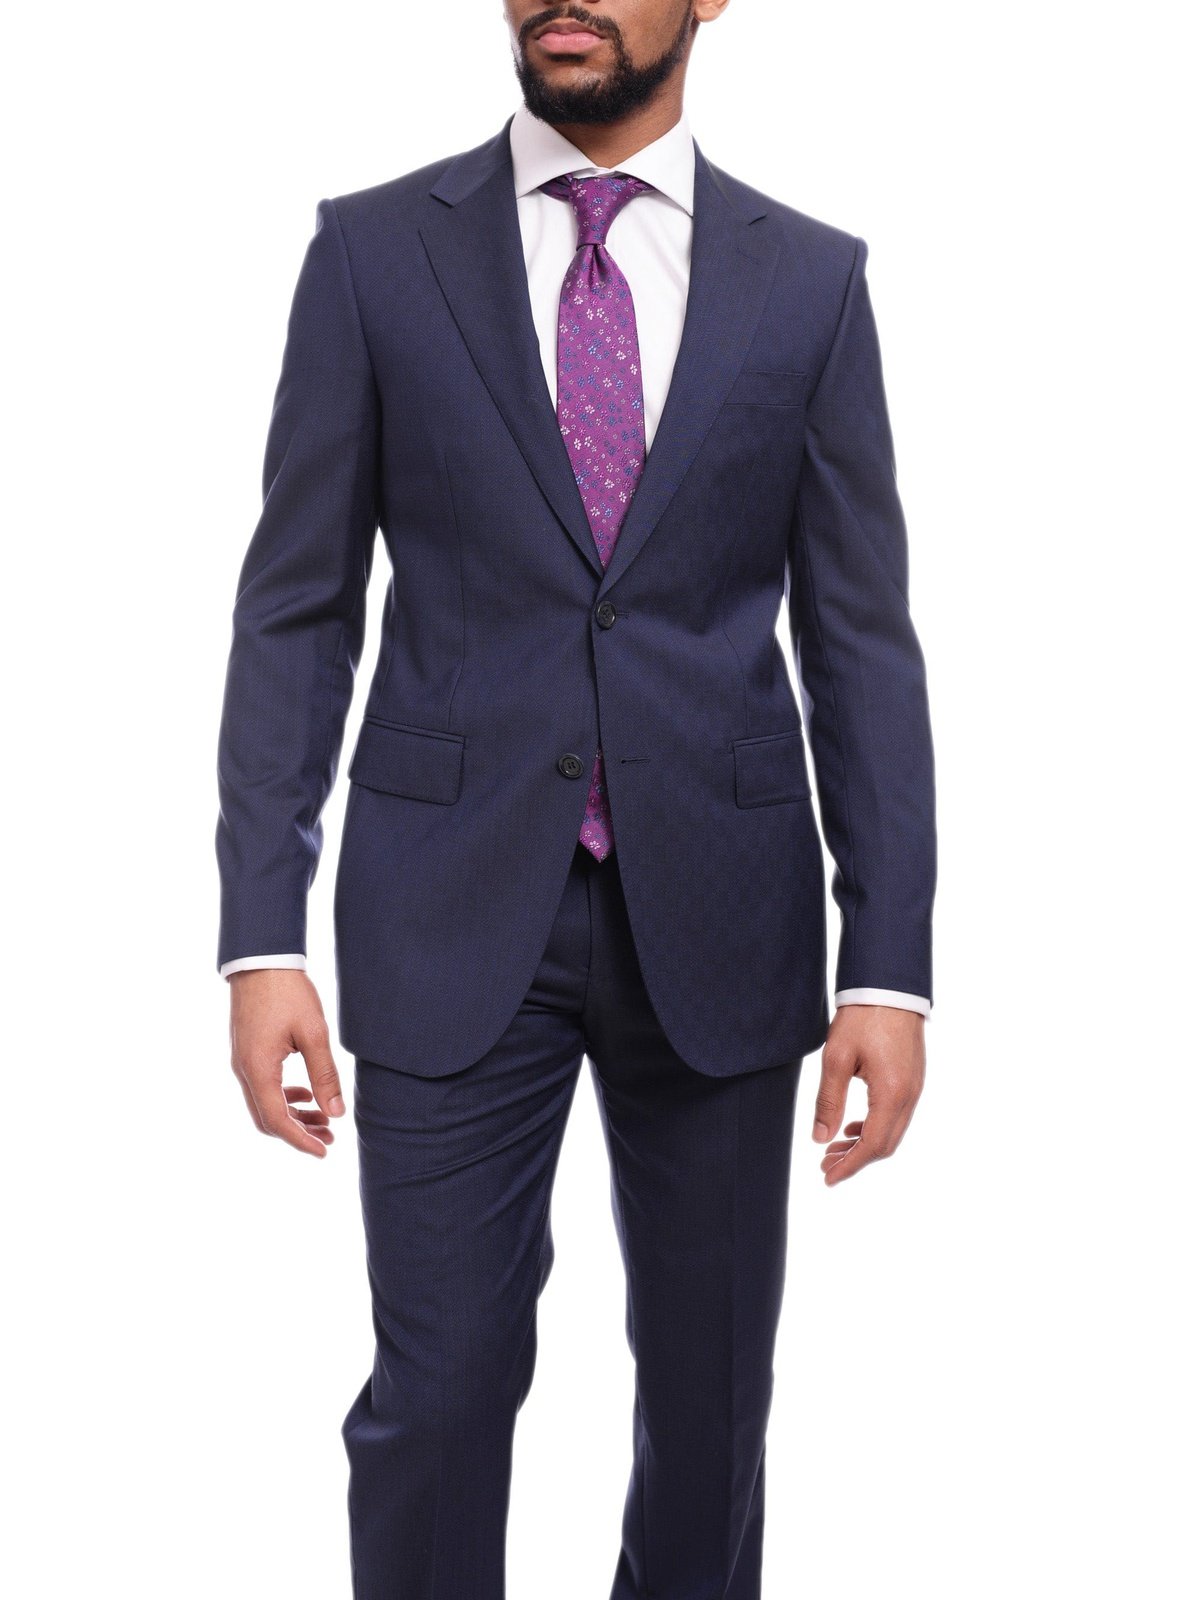 Napoli TWO PIECE SUITS Napoli Slim Fit Textured Navy Blue Two Button Half Canvassed Marzotto Wool Suit